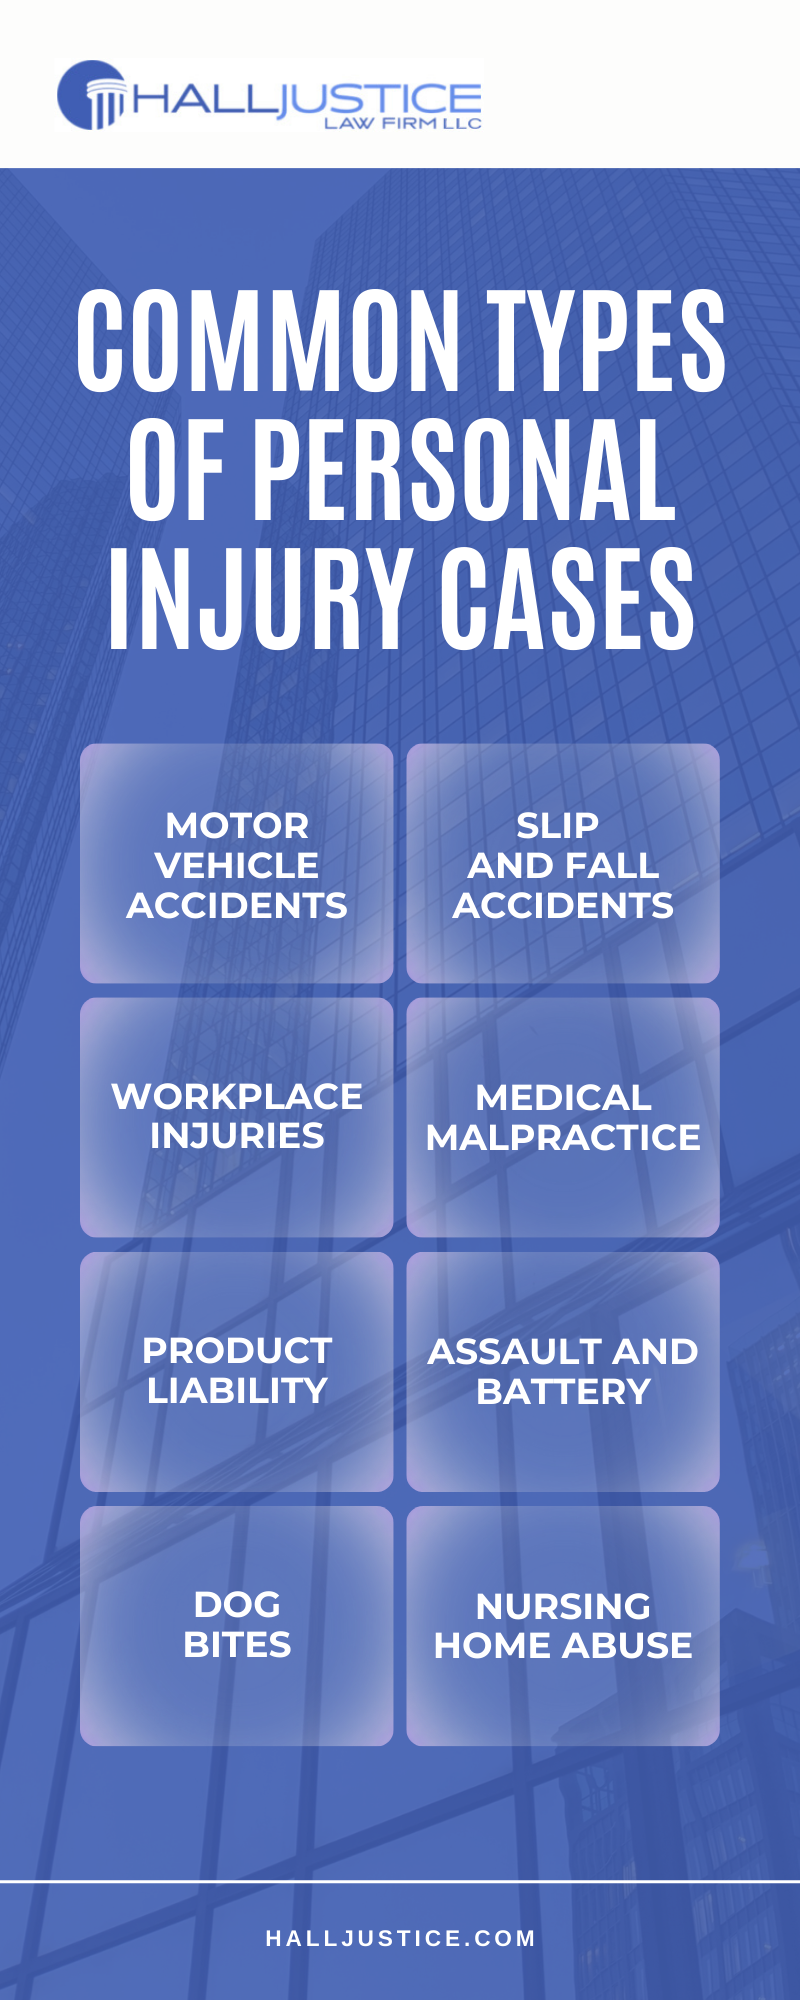 Common Types Of Personal Injury Cases Infographic